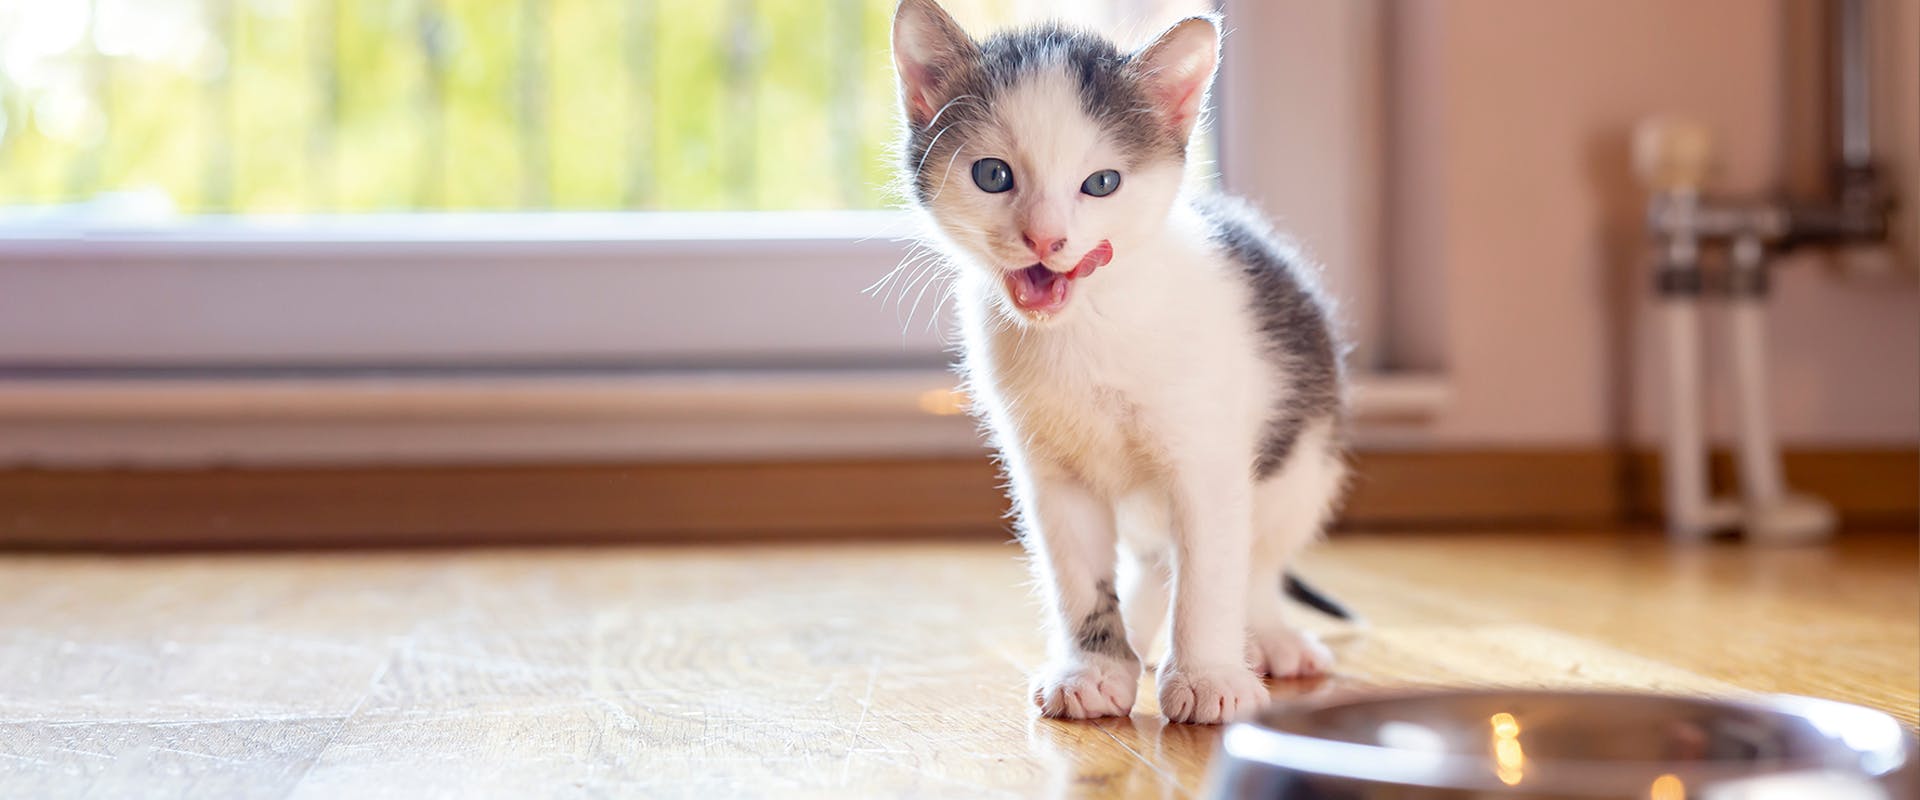 A kitten licking its lips, an empty food bowl in front of it